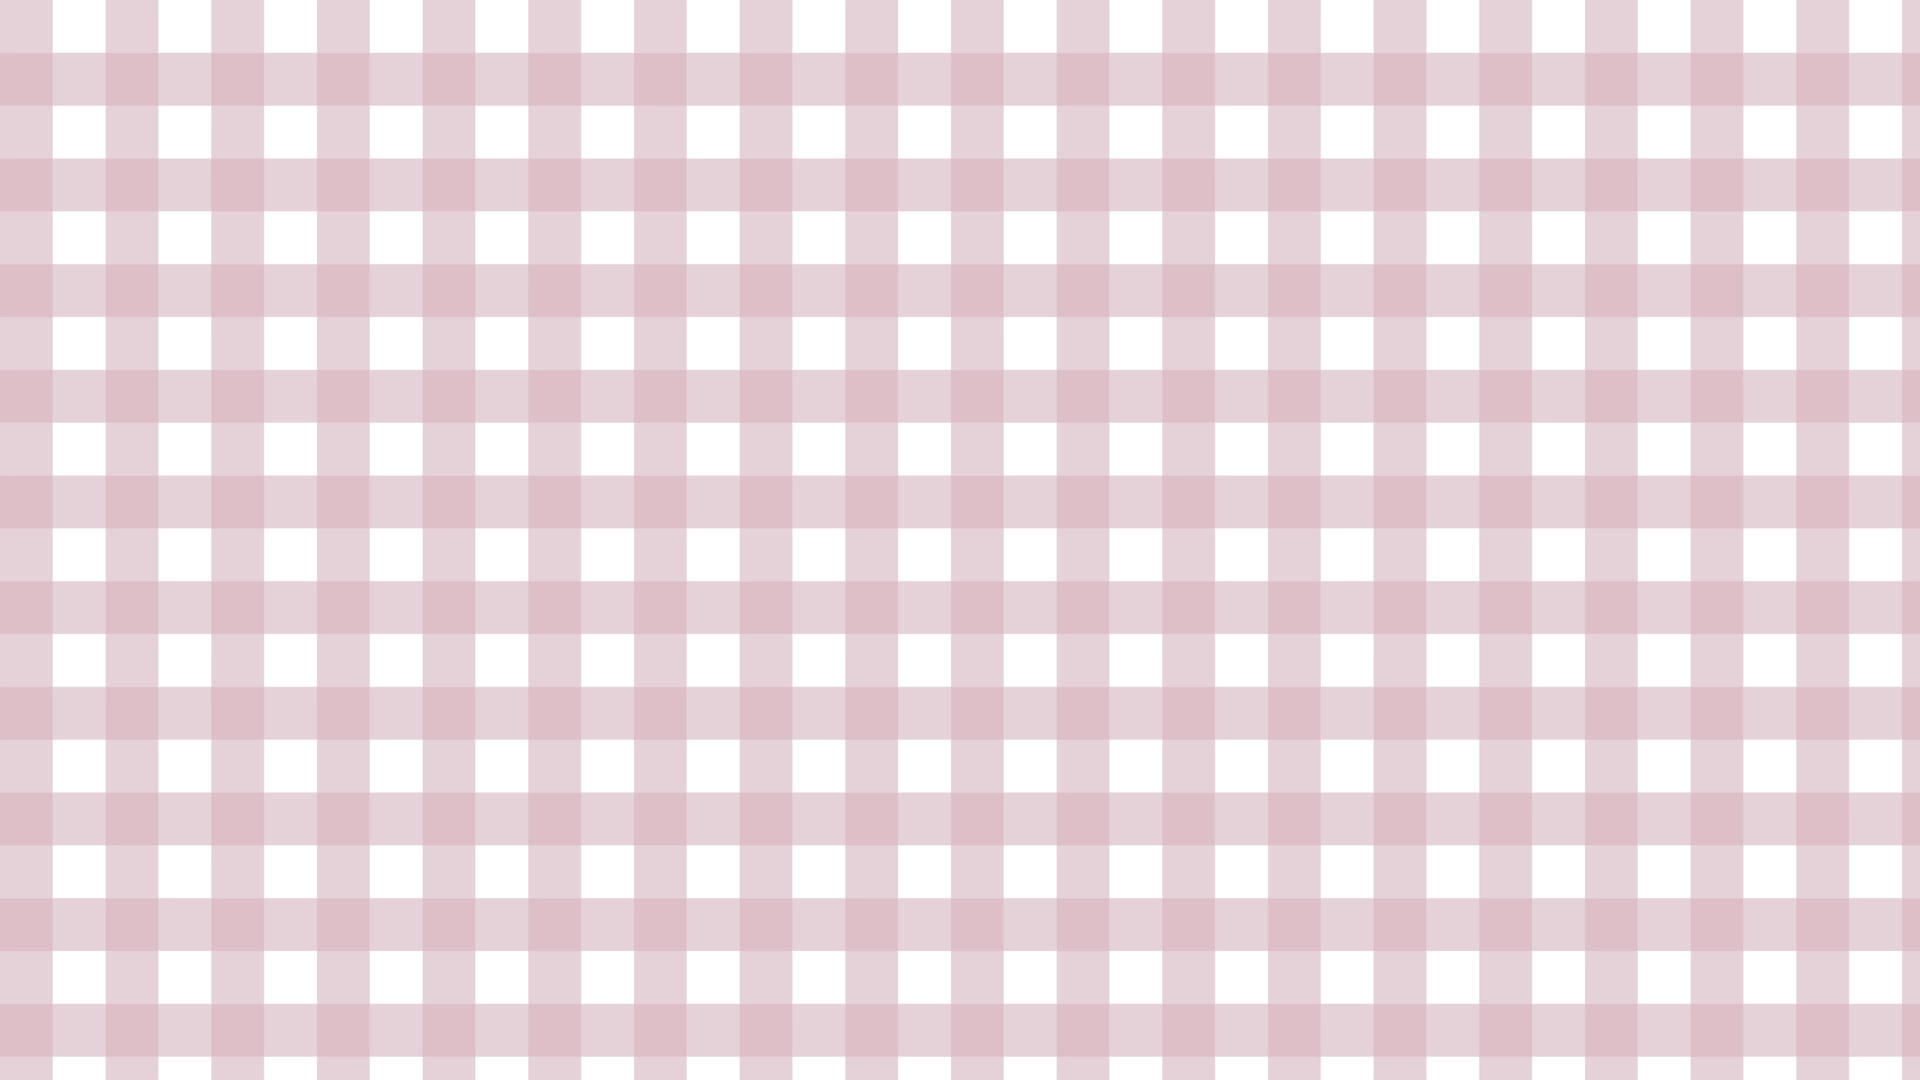 1920x1080 aesthetic cute pastel pink gingham, checkerboard, plaid, tartan pattern background illustration, perfect for wallpaper, backdrop, postcard, background for your design 8616575 Vector Art